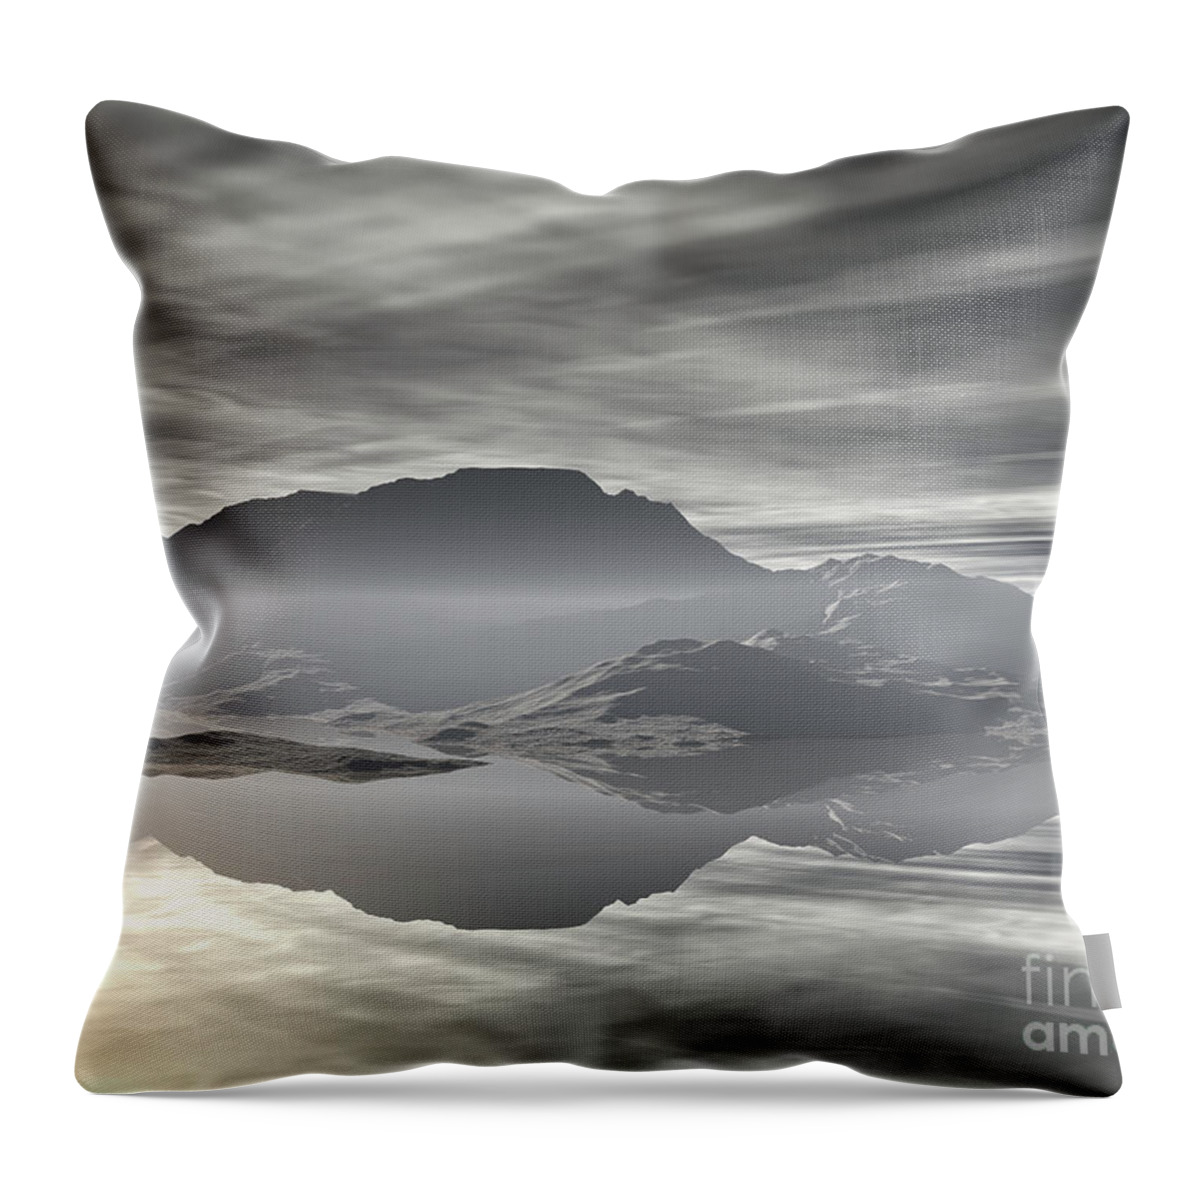 Digital Art Throw Pillow featuring the digital art Isle of Serenity by Phil Perkins